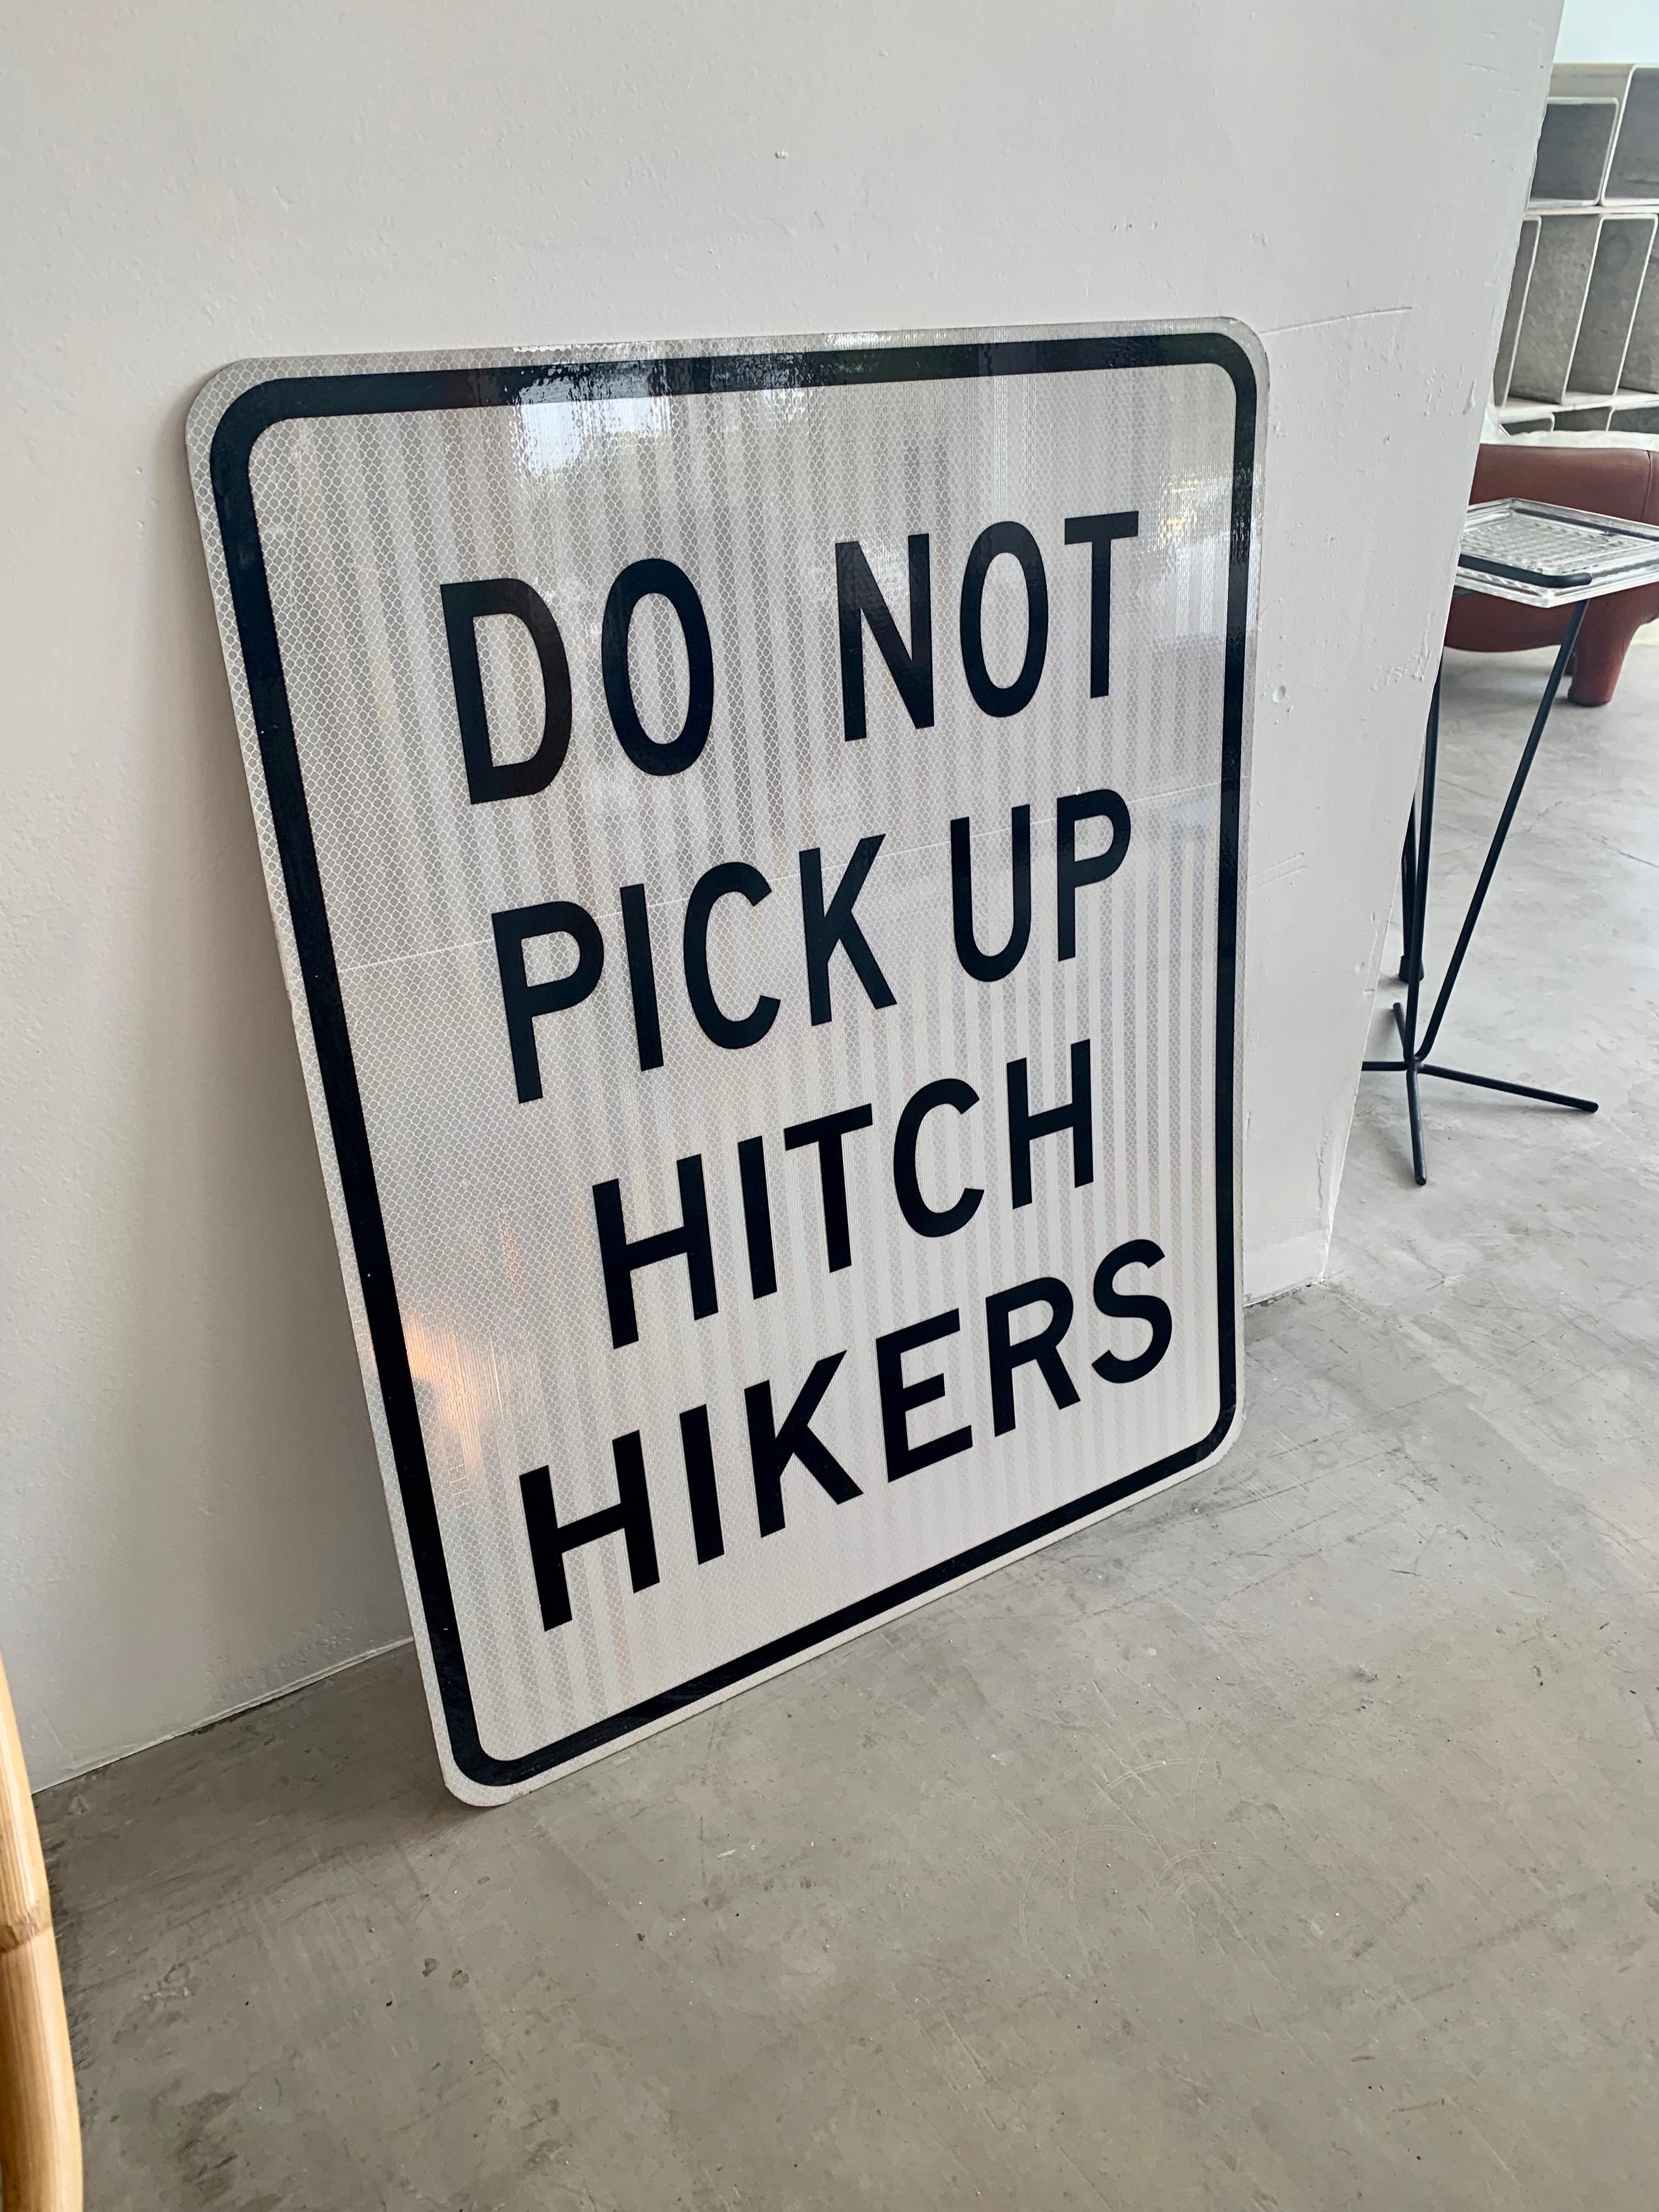 Great vintage highway sign from the southern United States. Sign says 